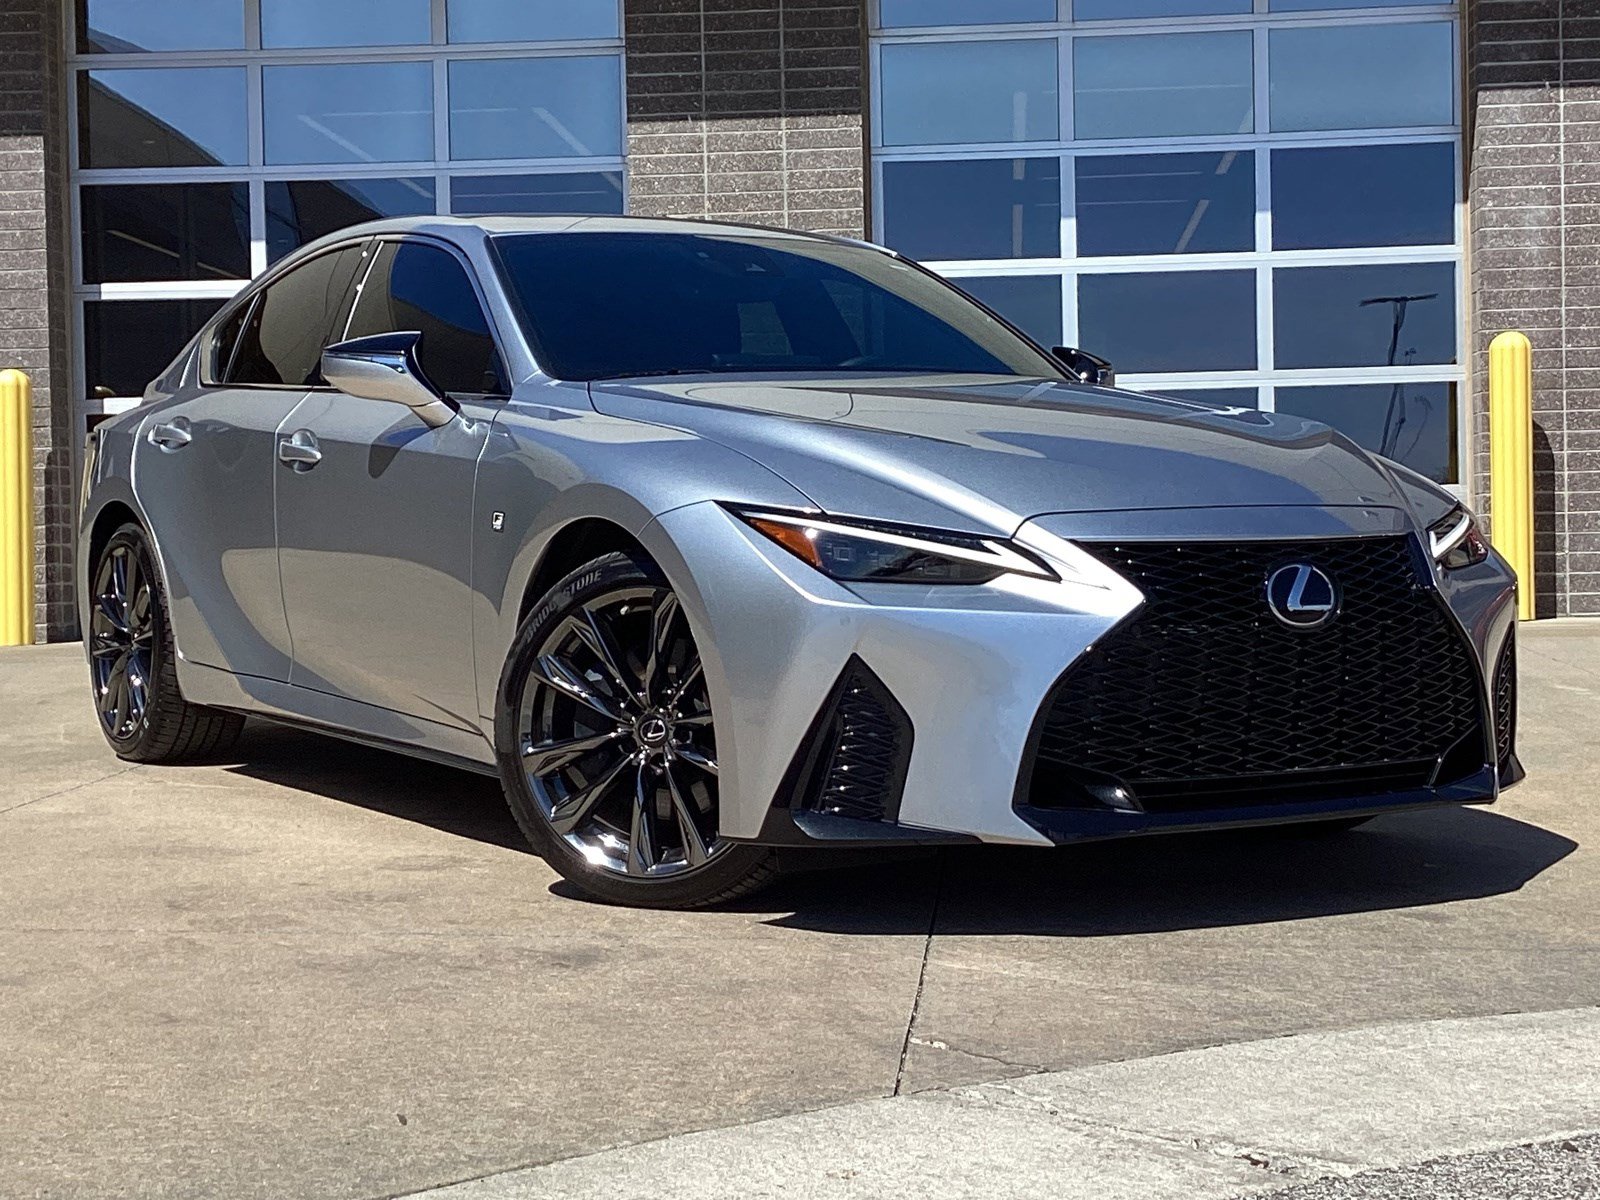 Certified Pre-Owned 2022 Lexus IS 350 F SPORT Sedan in Cary #SA024602 |  Hendrick Dodge Cary